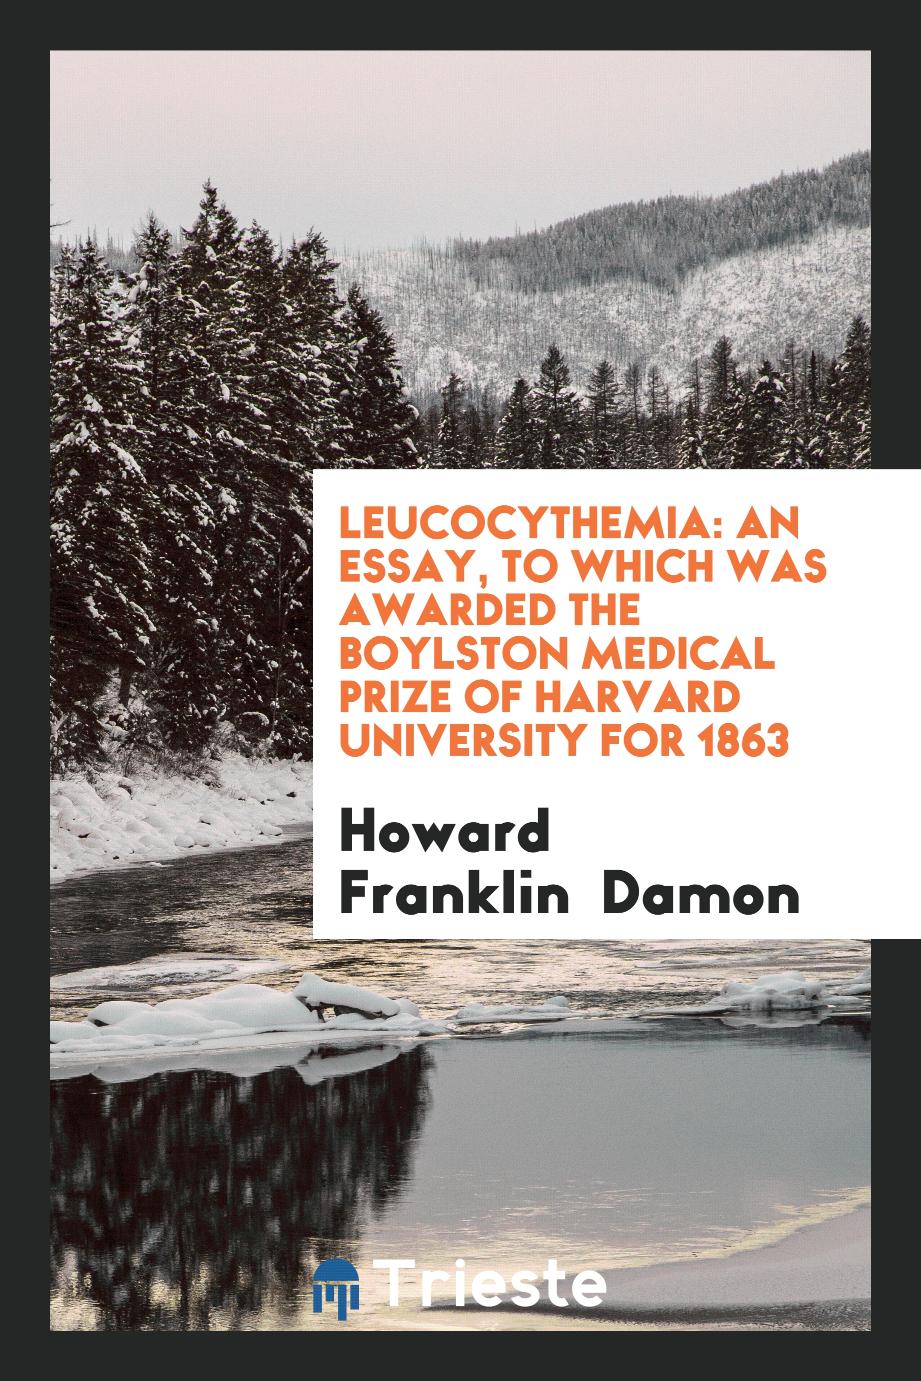 Leucocythemia: An Essay, to Which Was Awarded the Boylston Medical Prize of Harvard University for 1863